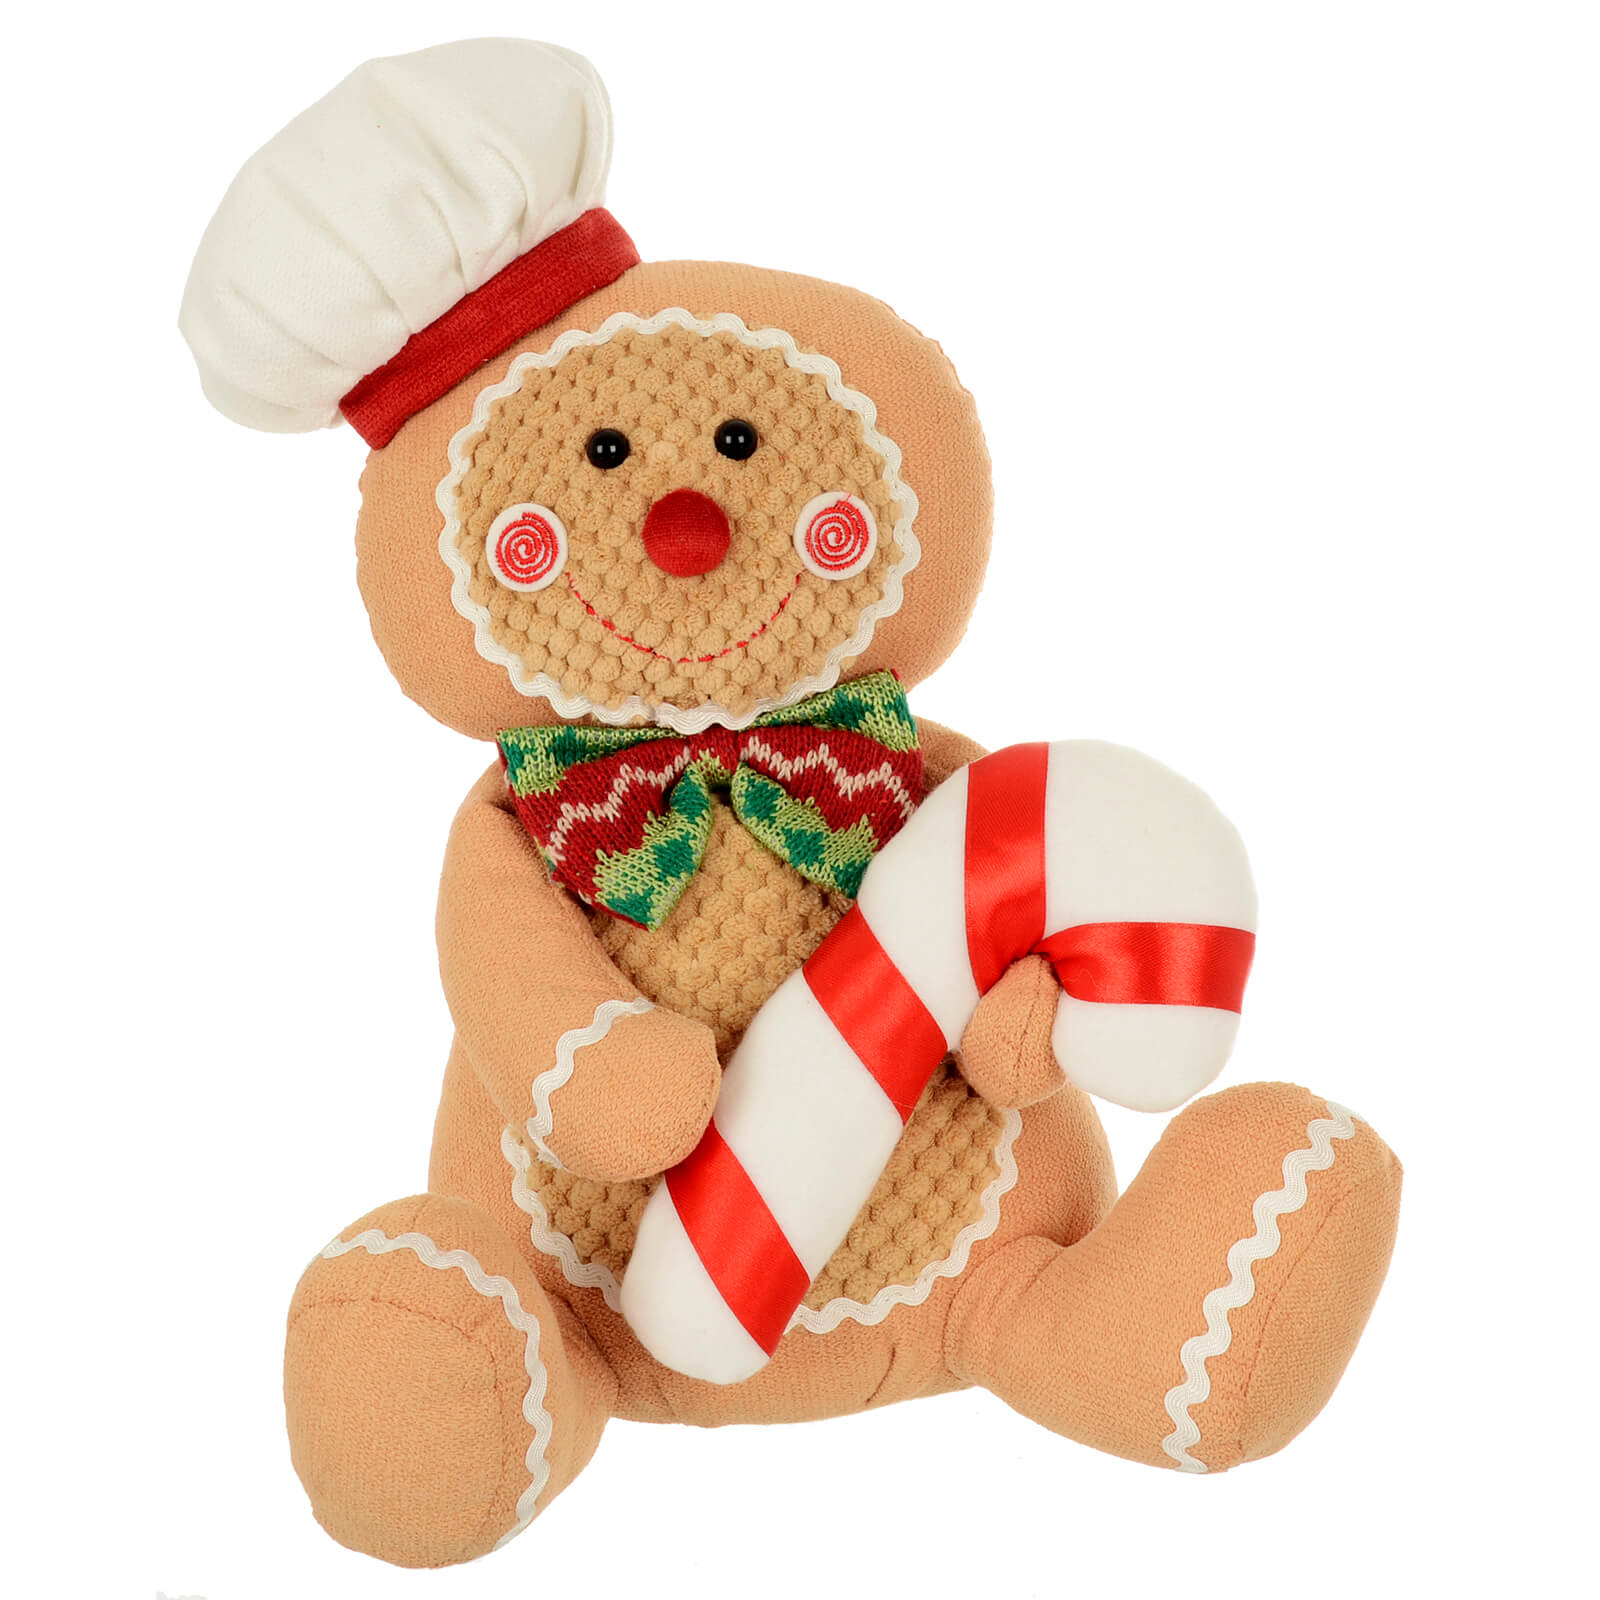 Gingerbread man 33cm figure with candy cane